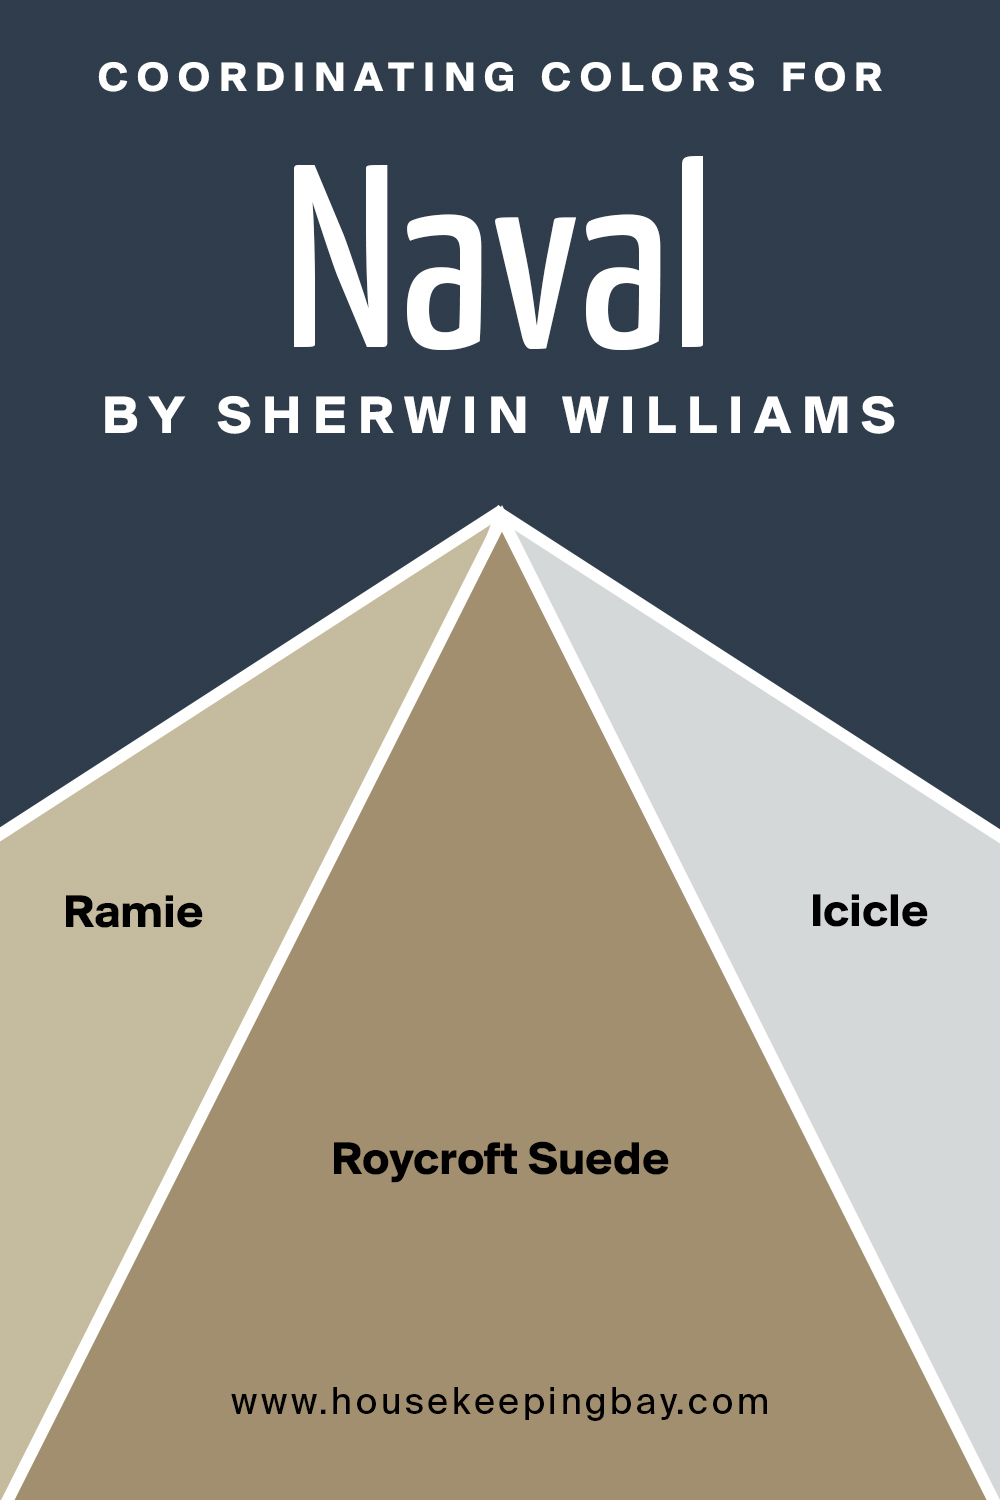 Coordinating Colors for Naval by Sherwin Williams